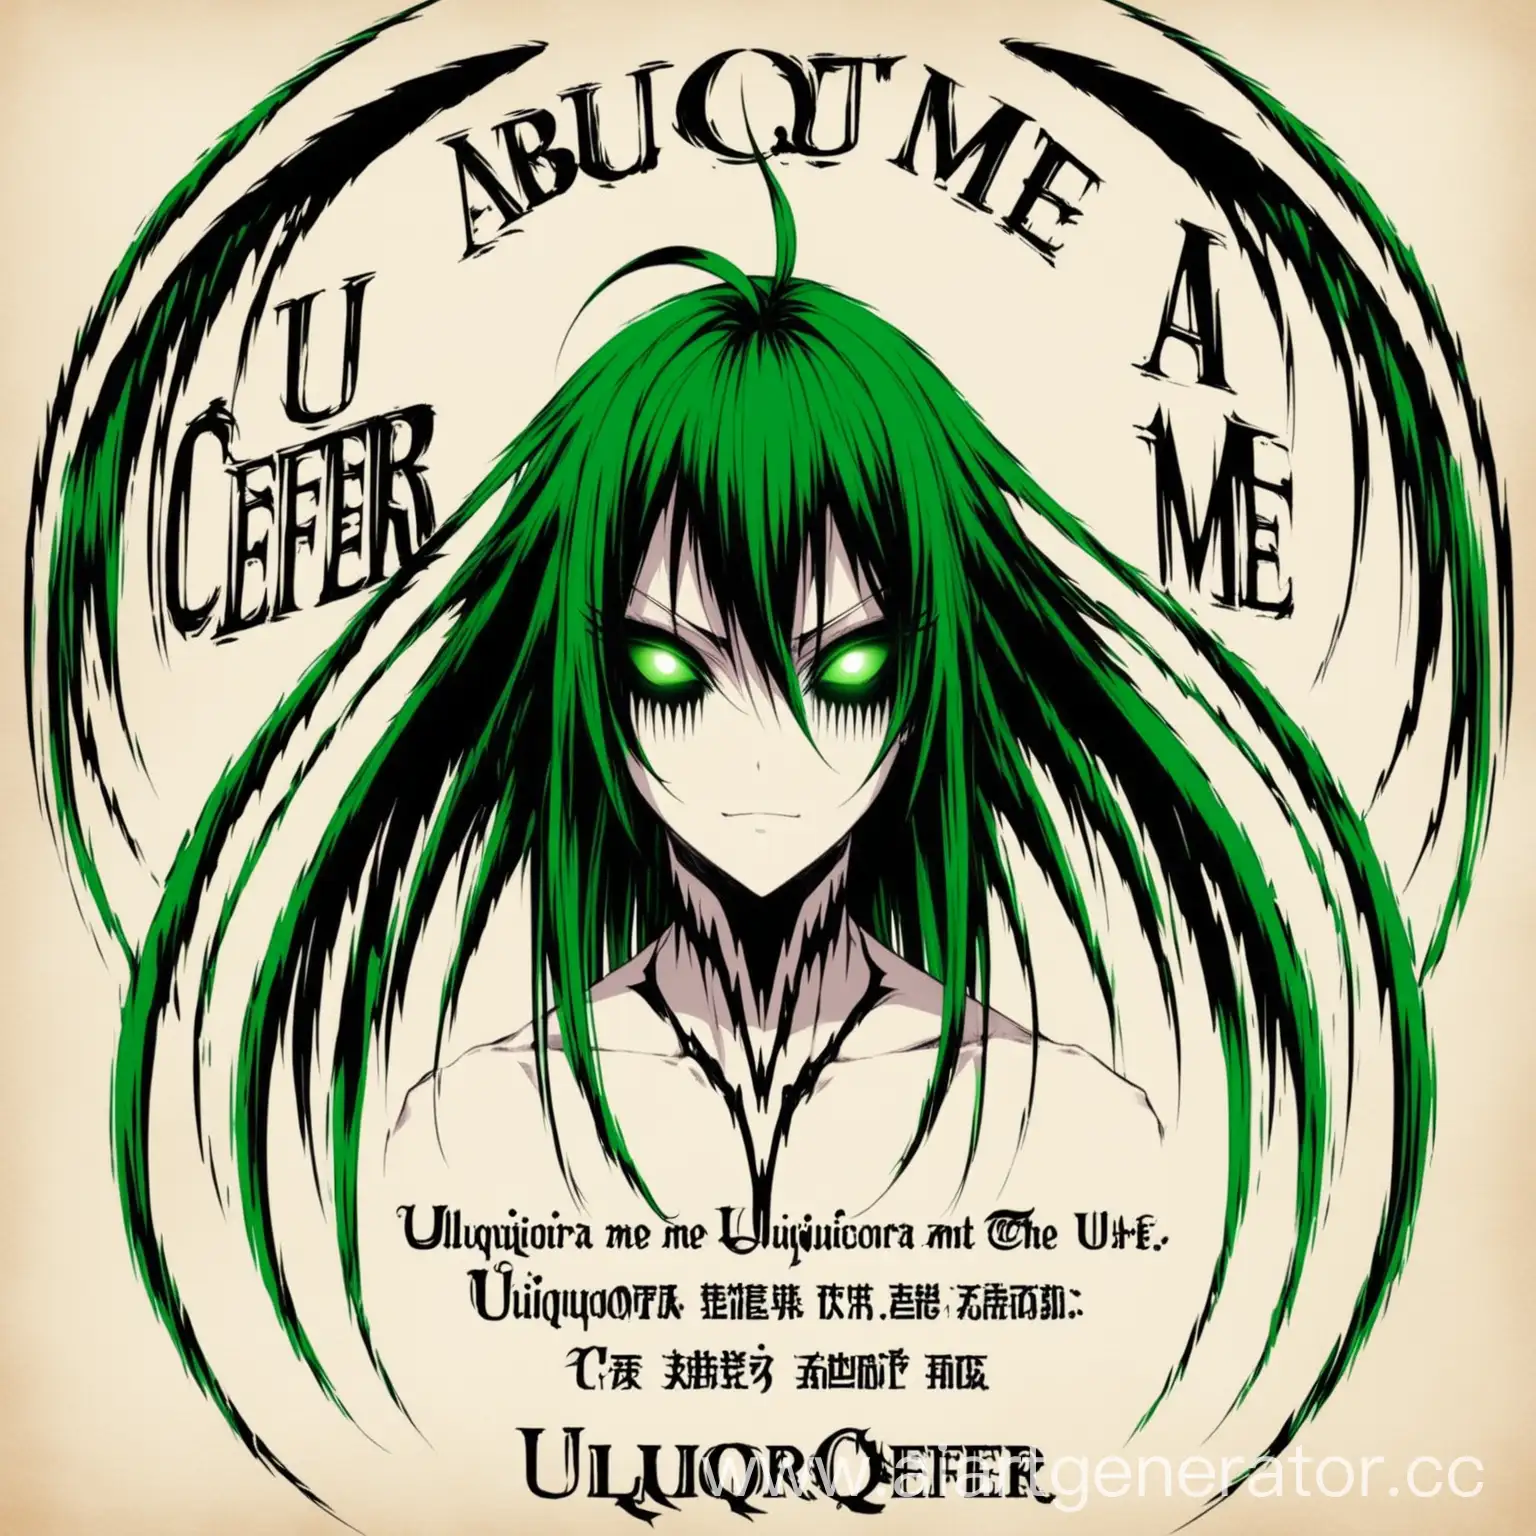 Ulquiorra-Cifer-Portrait-Mysterious-Anime-Character-ABOUT-ME